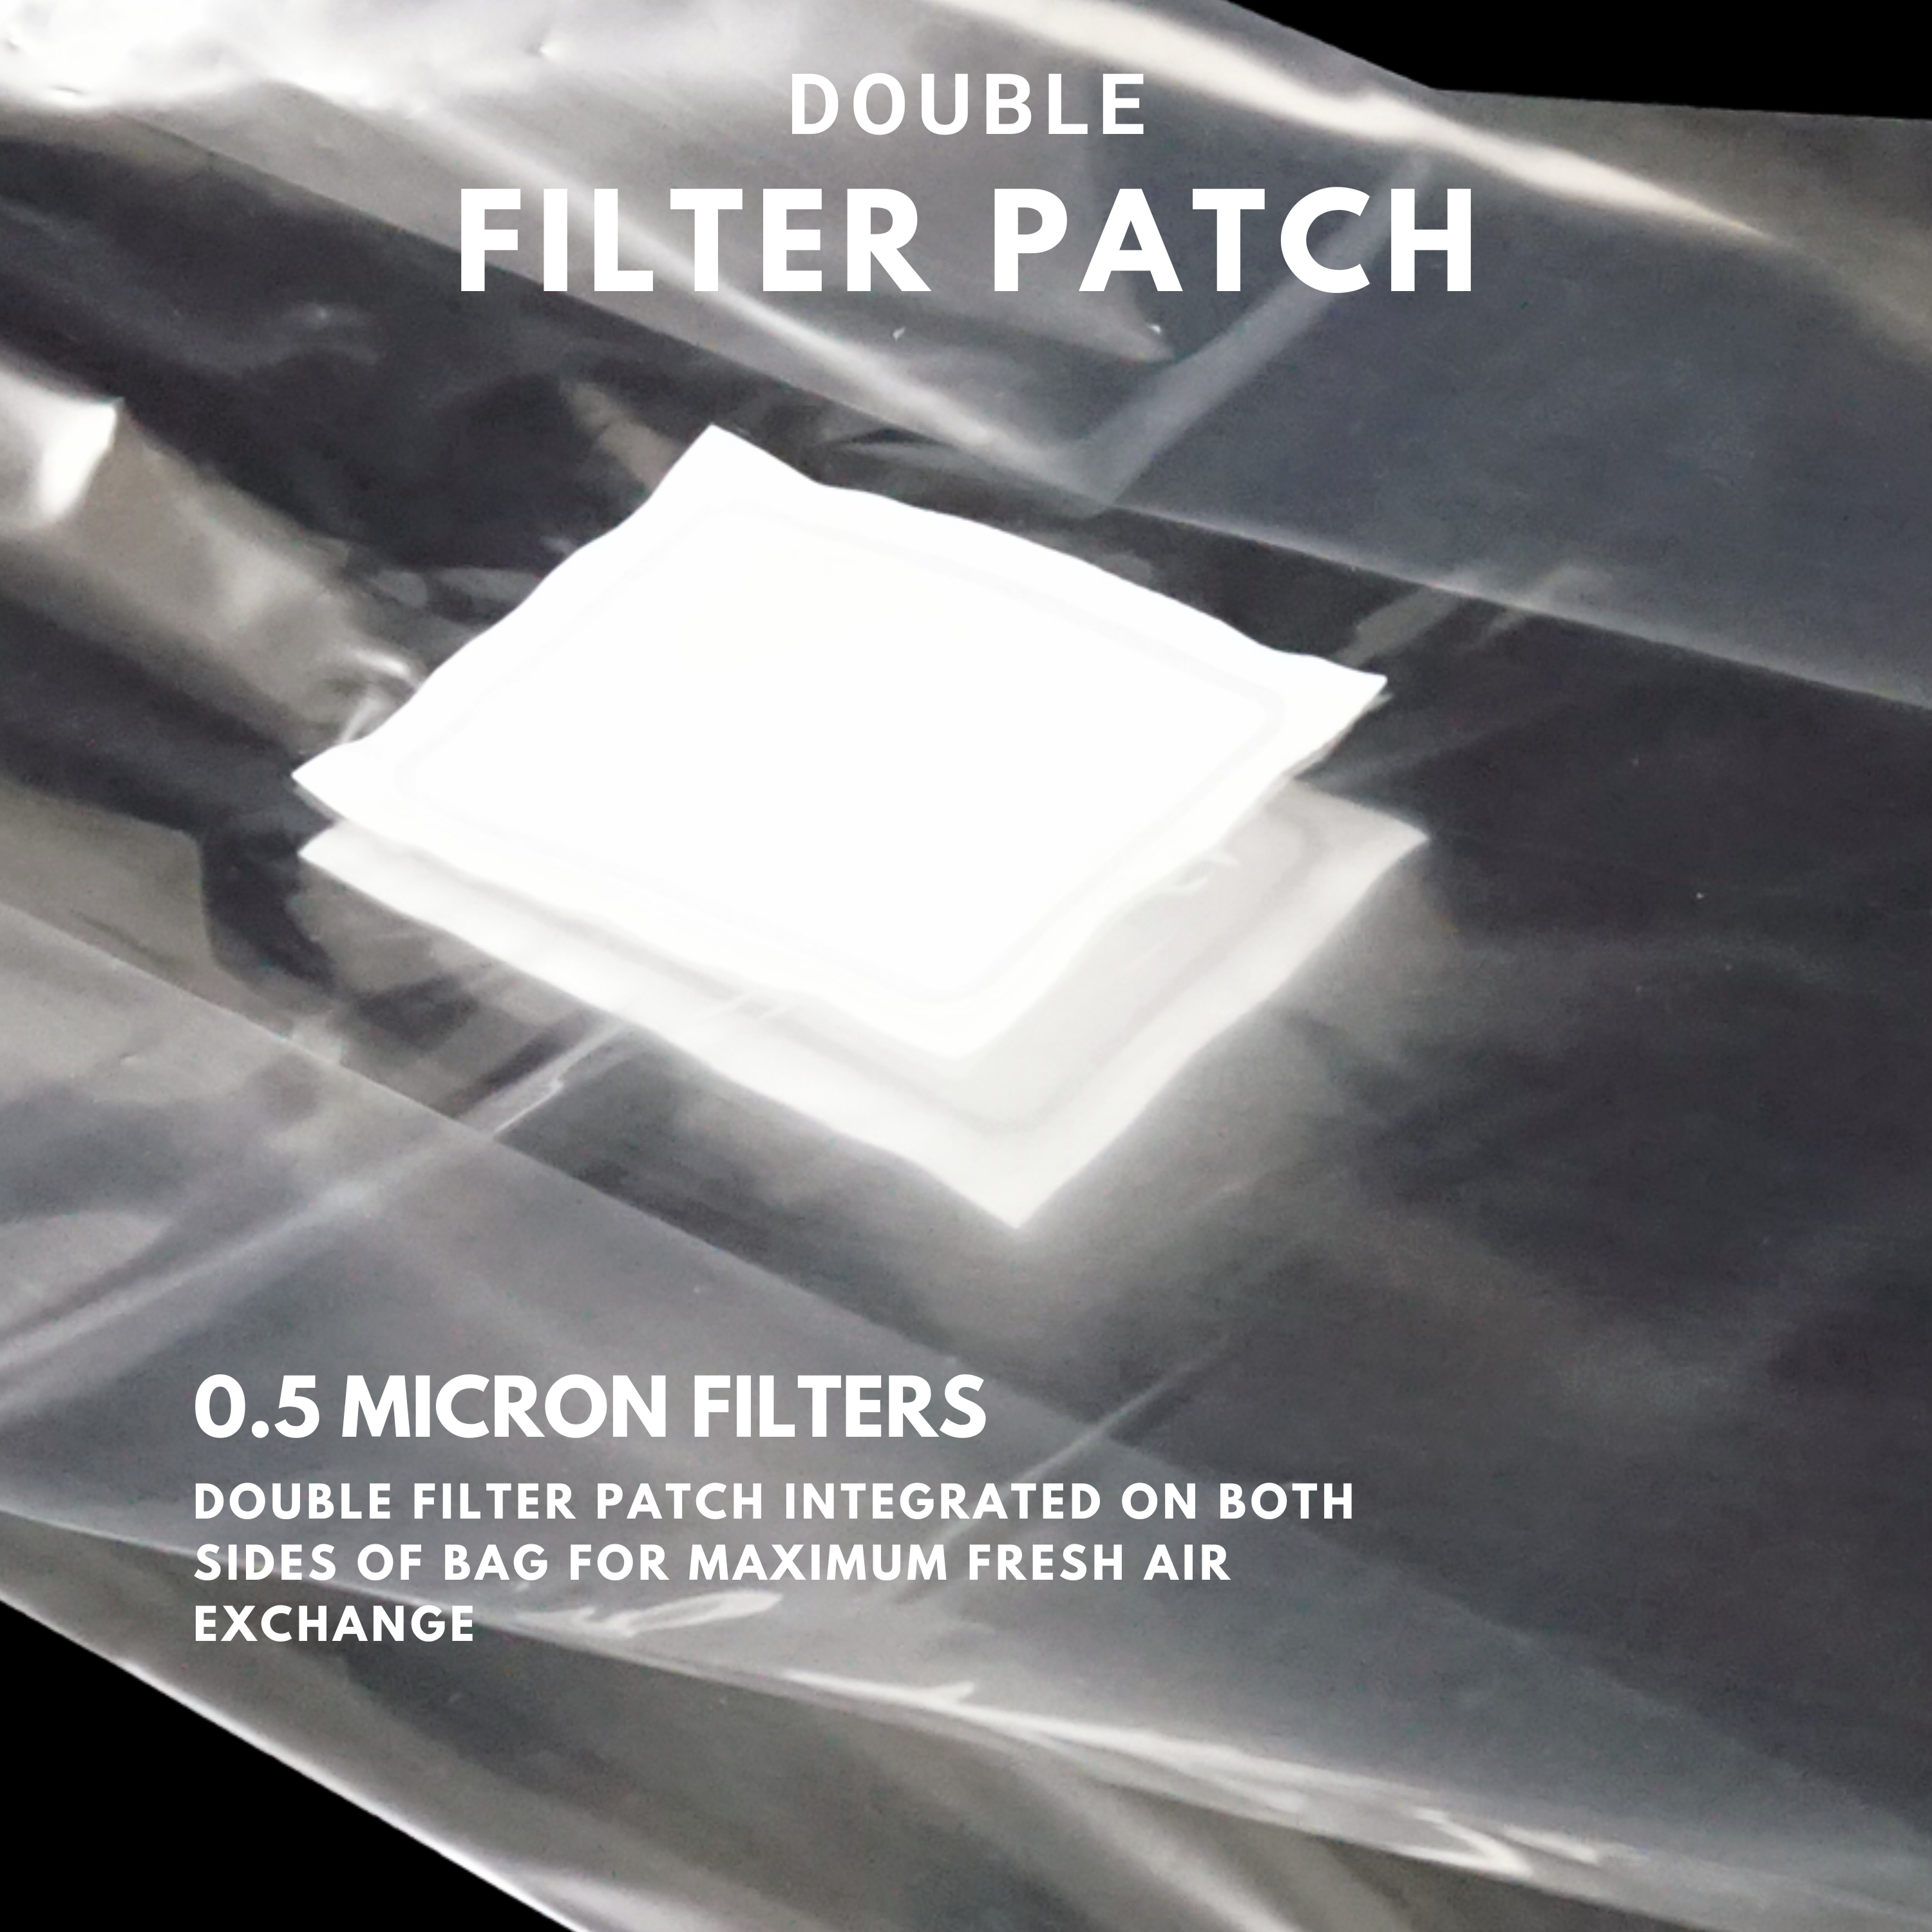 0.5 micron double filter patch up on mushroom grow bag close up